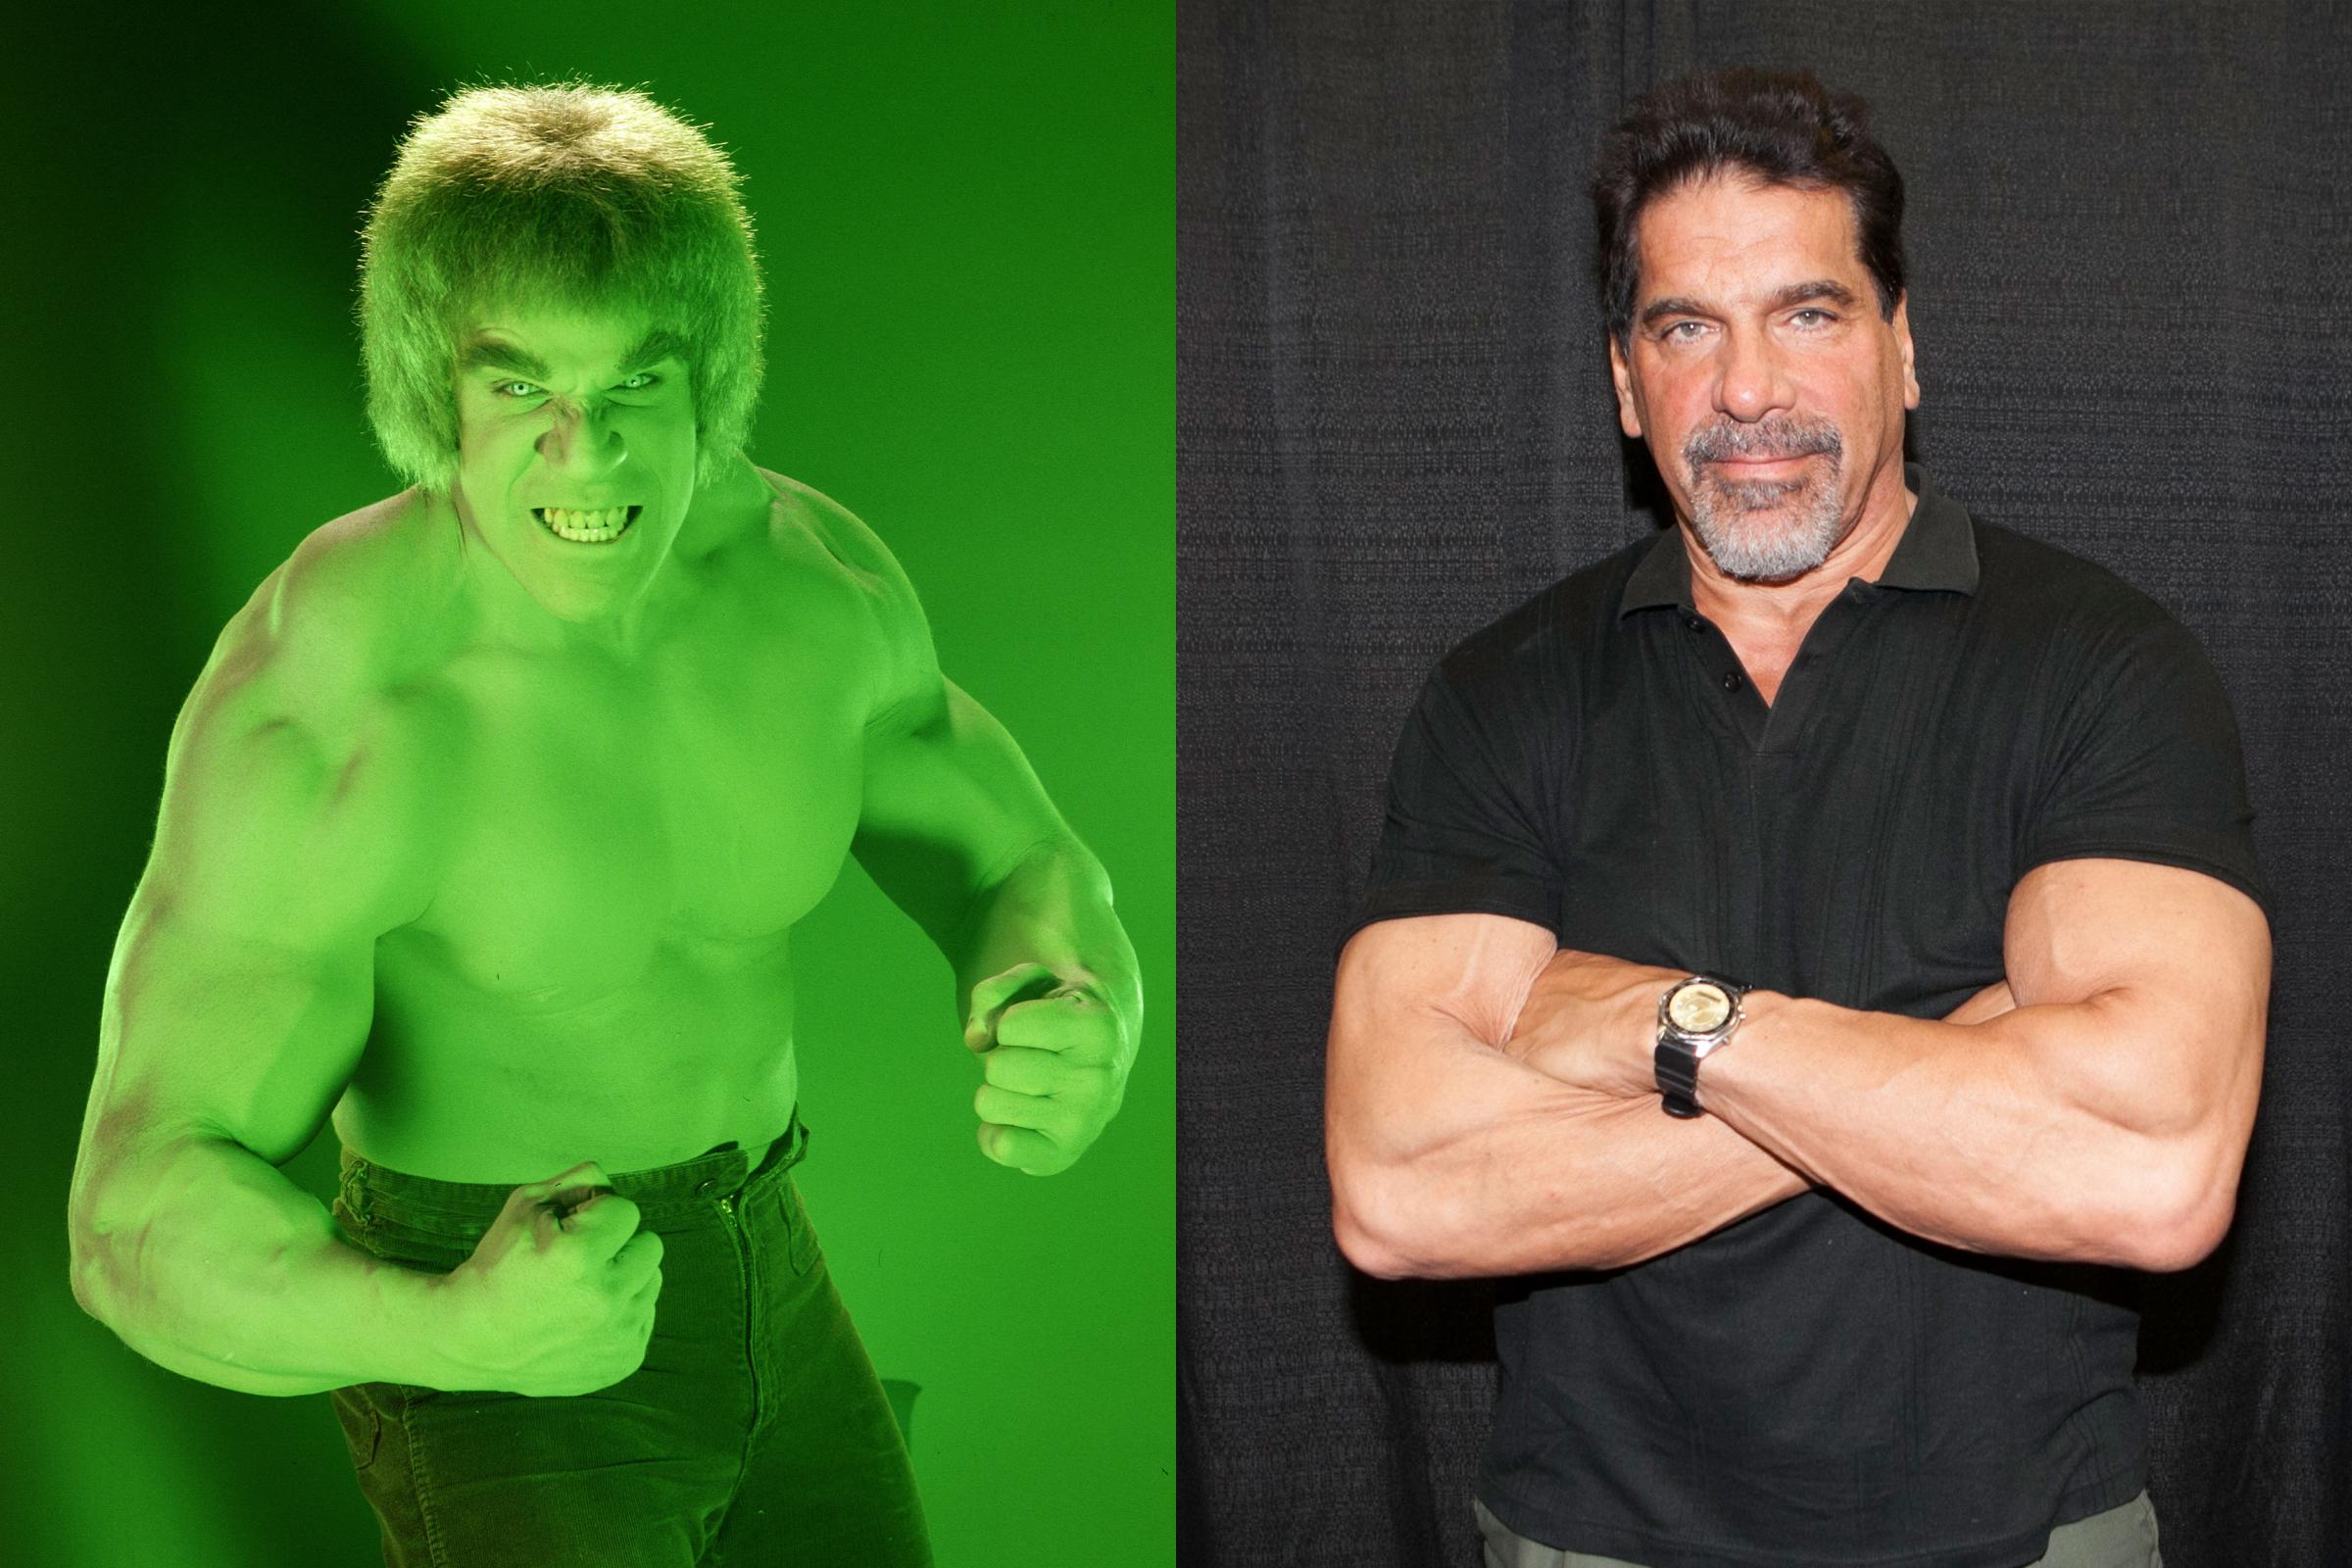 LOS ANGELES - MARCH 1:THE INCREDIBLE HULK cast member Lou Ferrigno as the 'Hulk'. The television program originally aired on CBS from March 1978 to June 1982. (Photo by CBS via Getty Images) *** Local Caption *** Lou Ferrigno